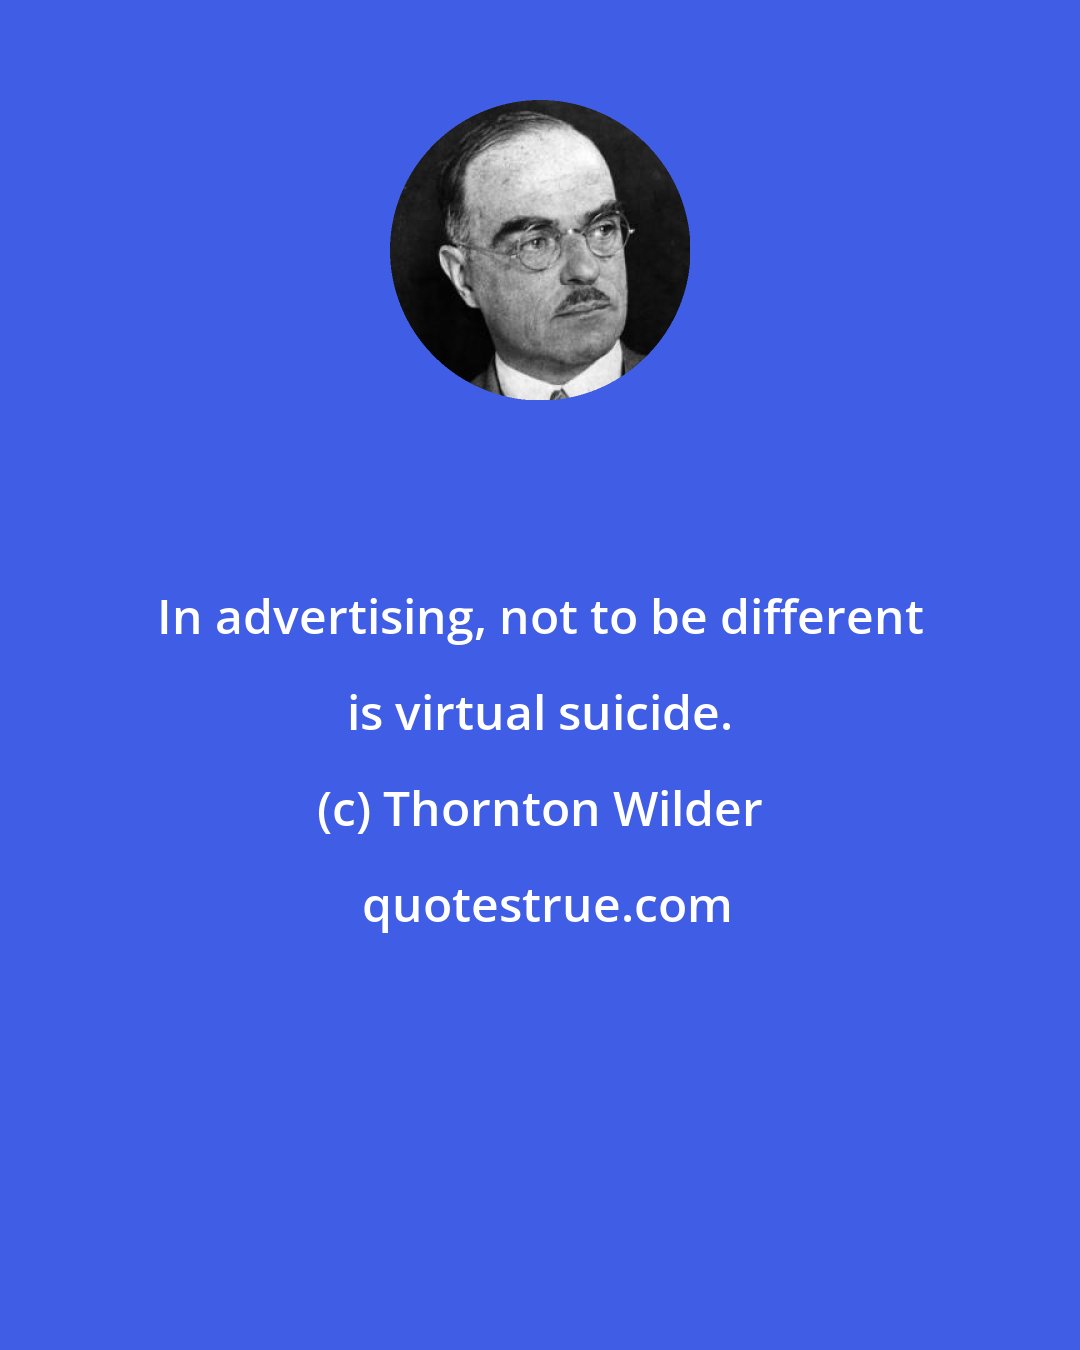 Thornton Wilder: In advertising, not to be different is virtual suicide.